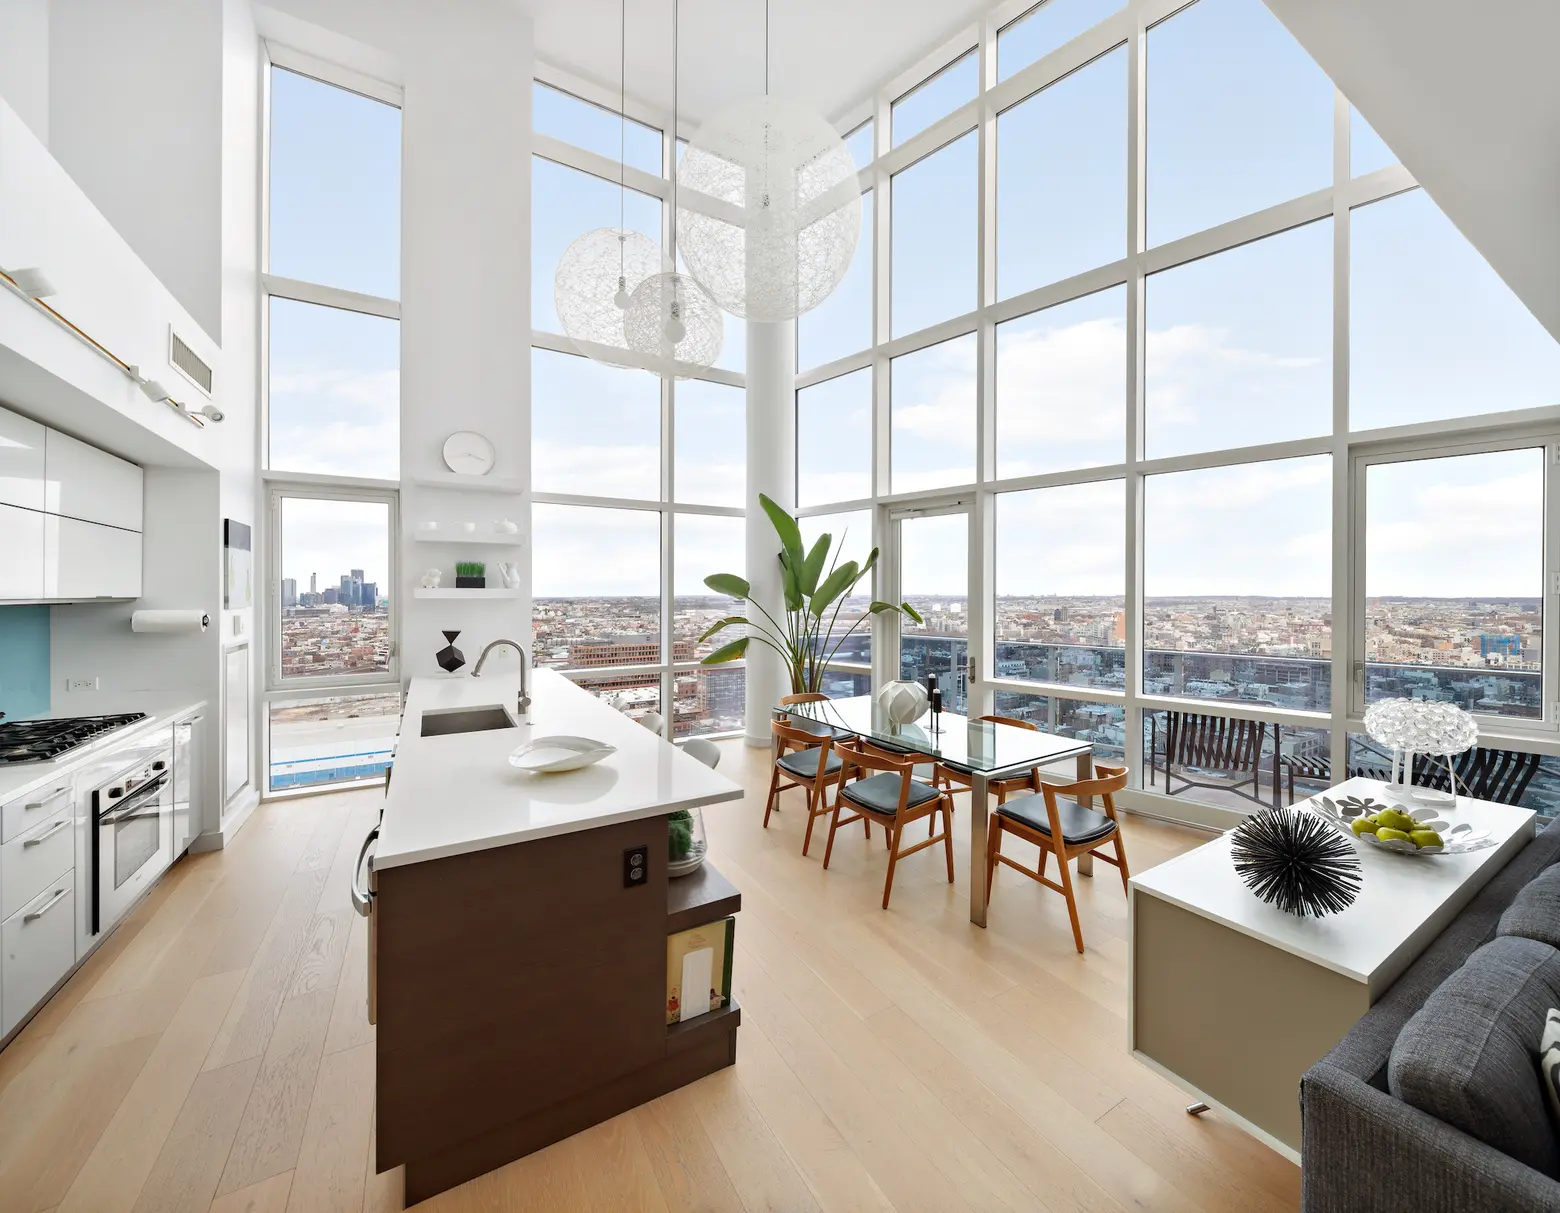 On the Williamsburg waterfront, this $4M penthouse has panoramic views and a private roof deck